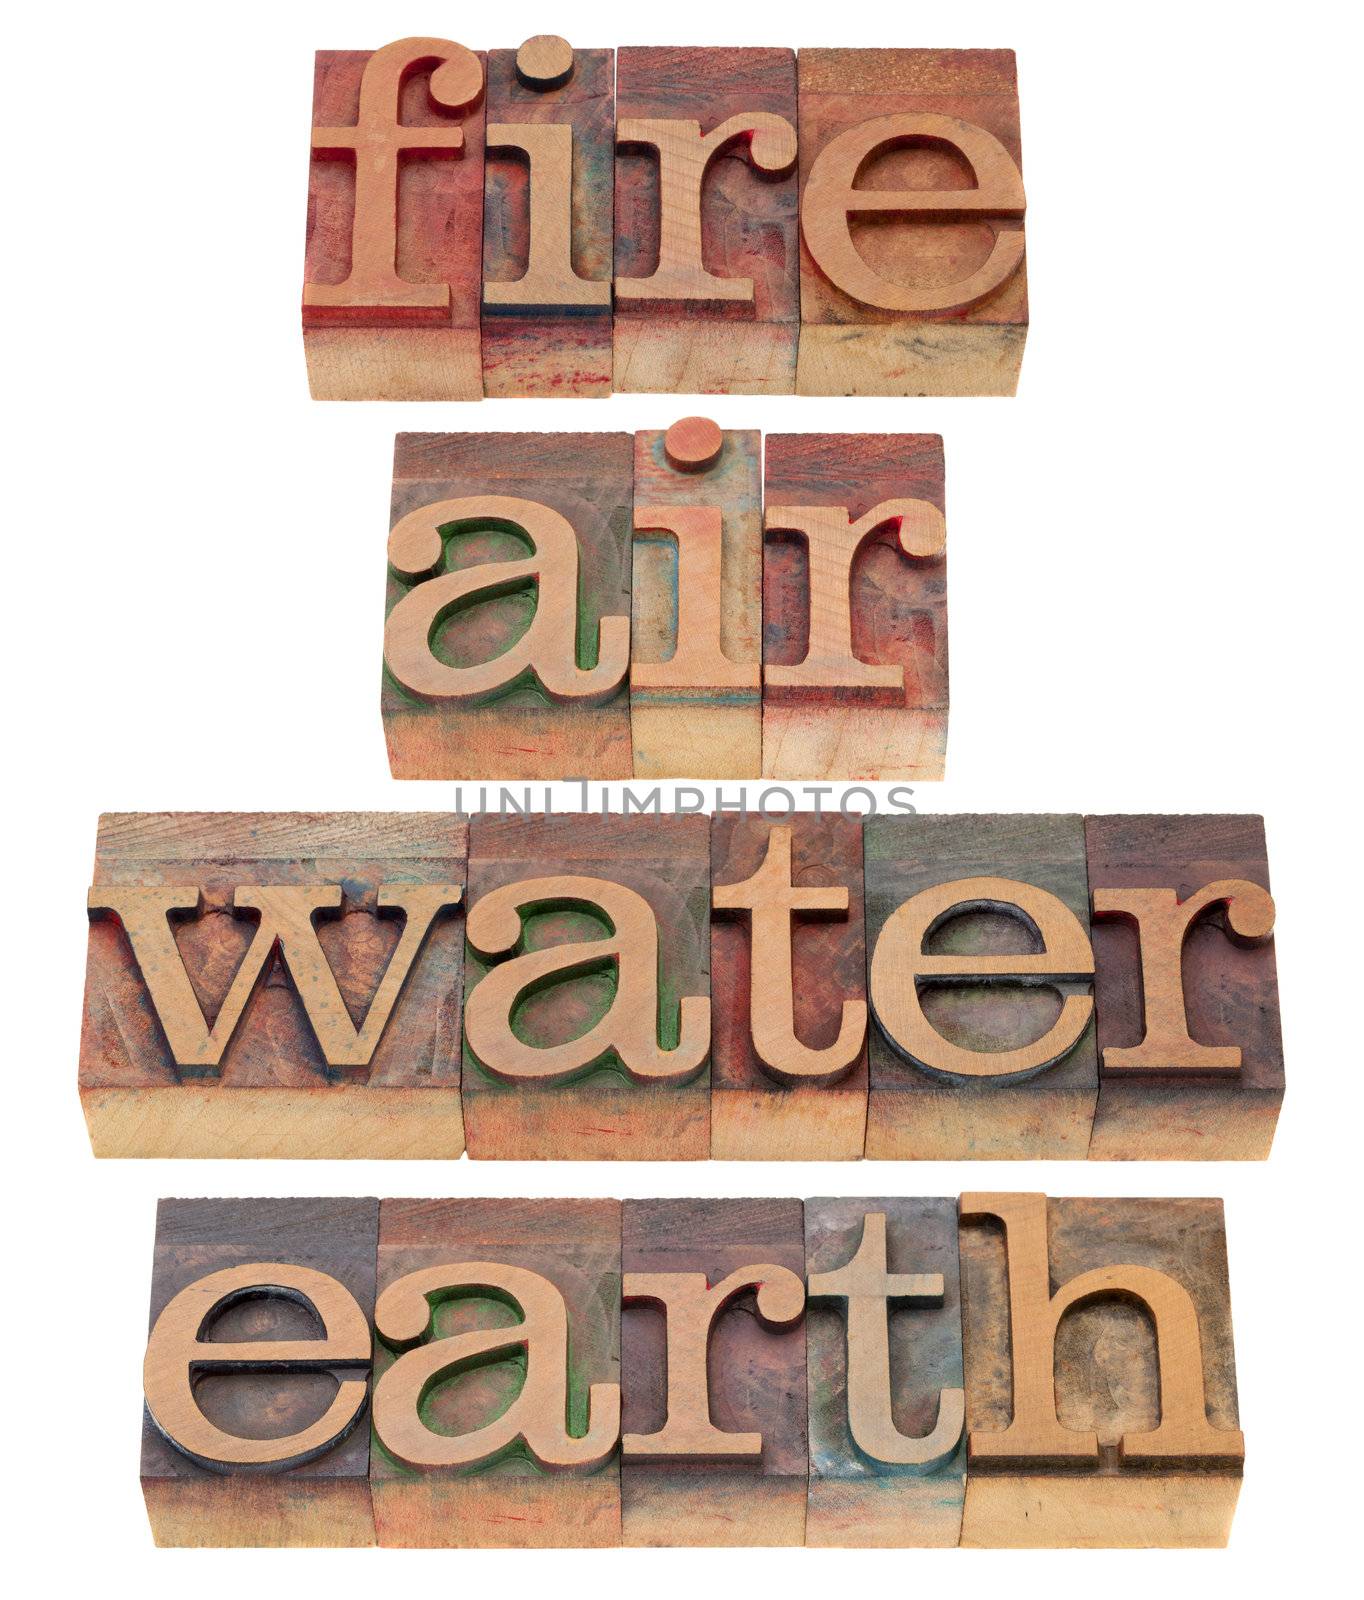 fire, air, water and earth by PixelsAway